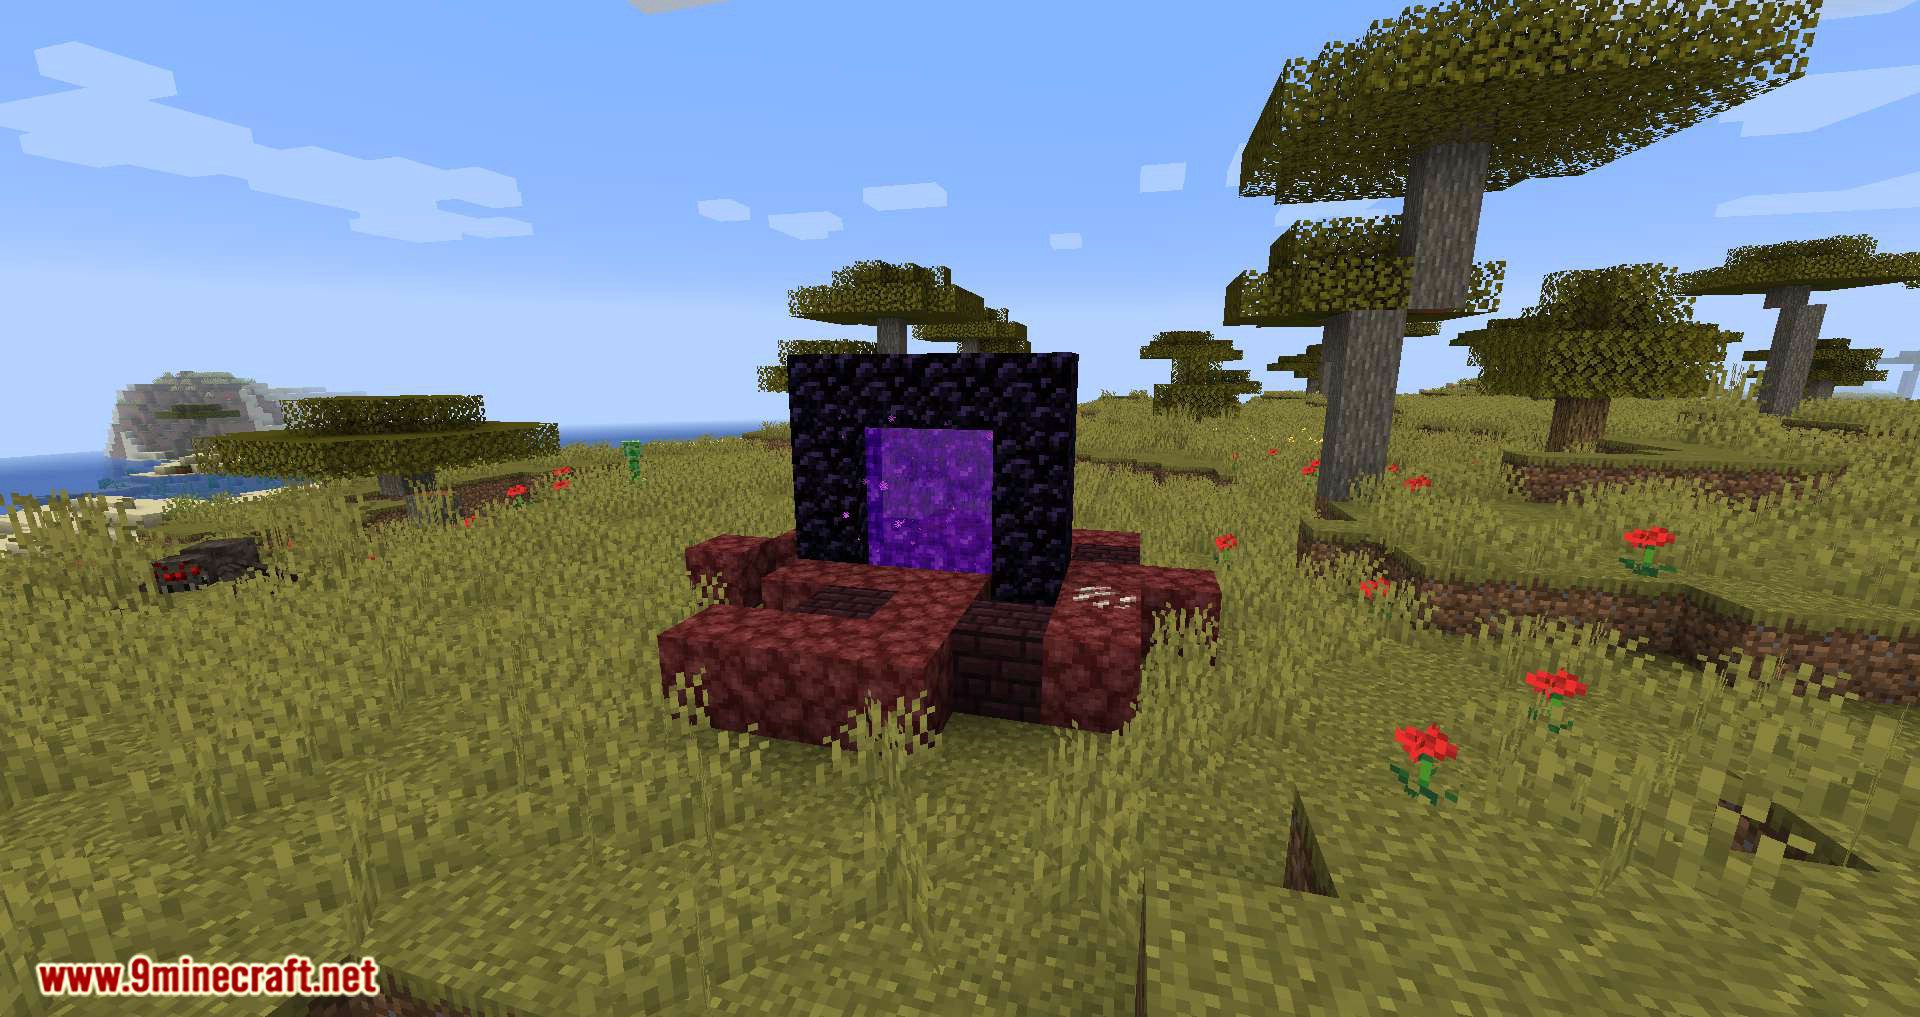 Nether Portal Spread Mod (1.20.4, 1.19.4) - Making Nether Portals A Bit More Ominous 5